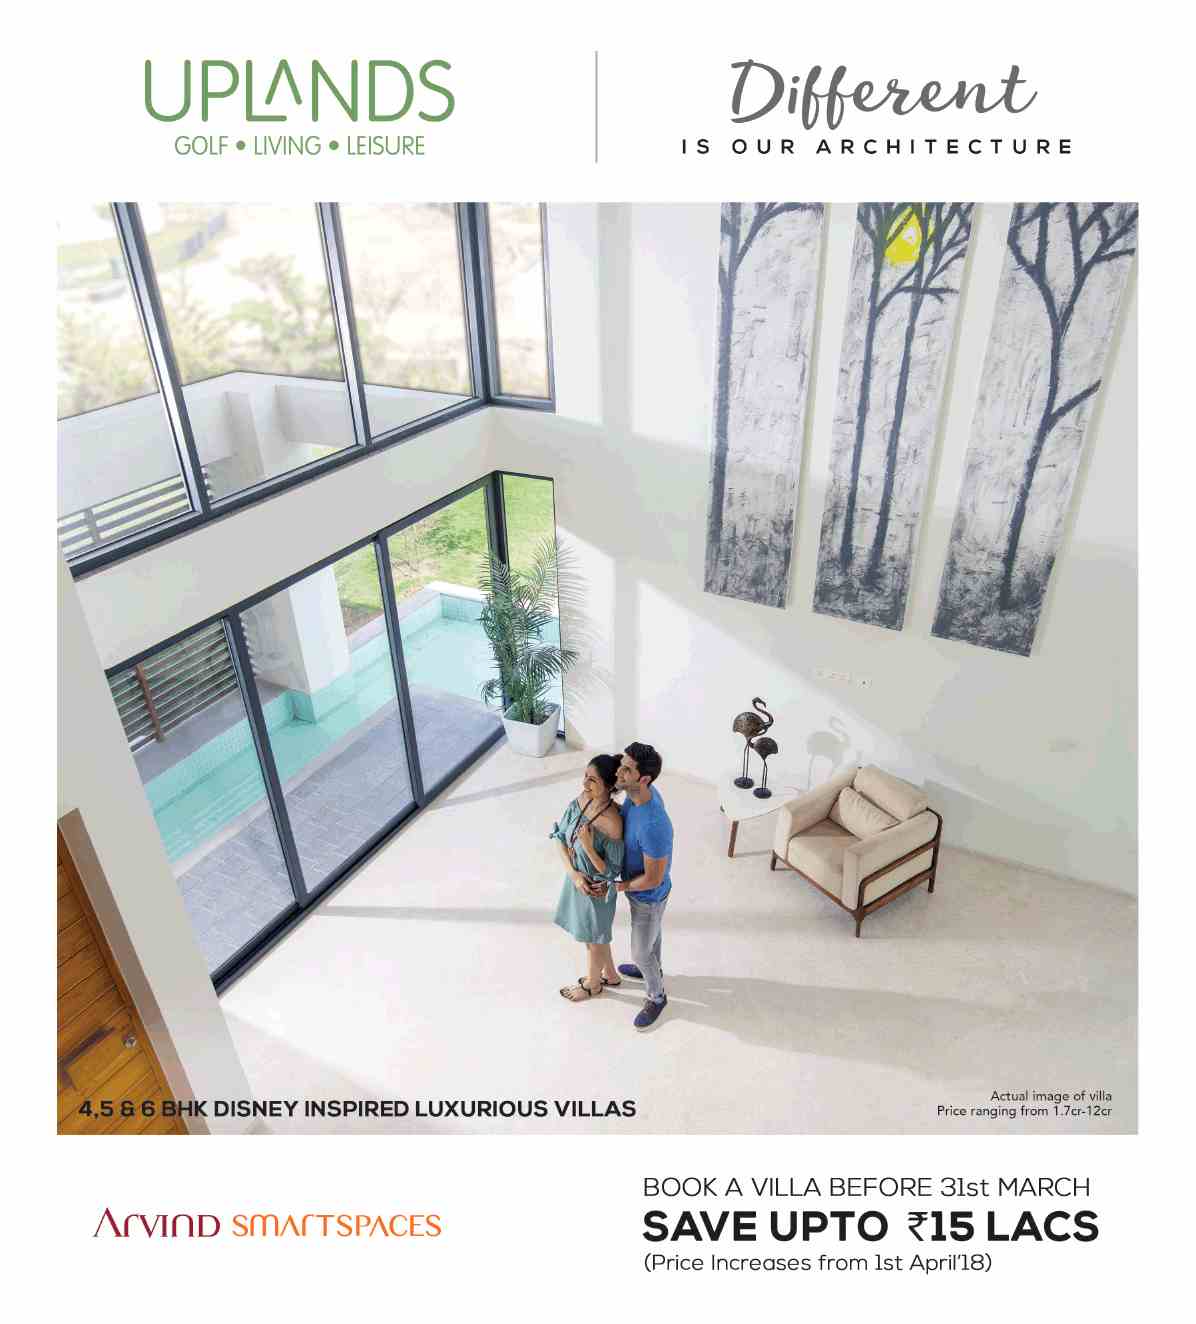 Book a villa before 31st March and save up to Rs. 15 Lacs at Arvind Uplands in Ahmedabad